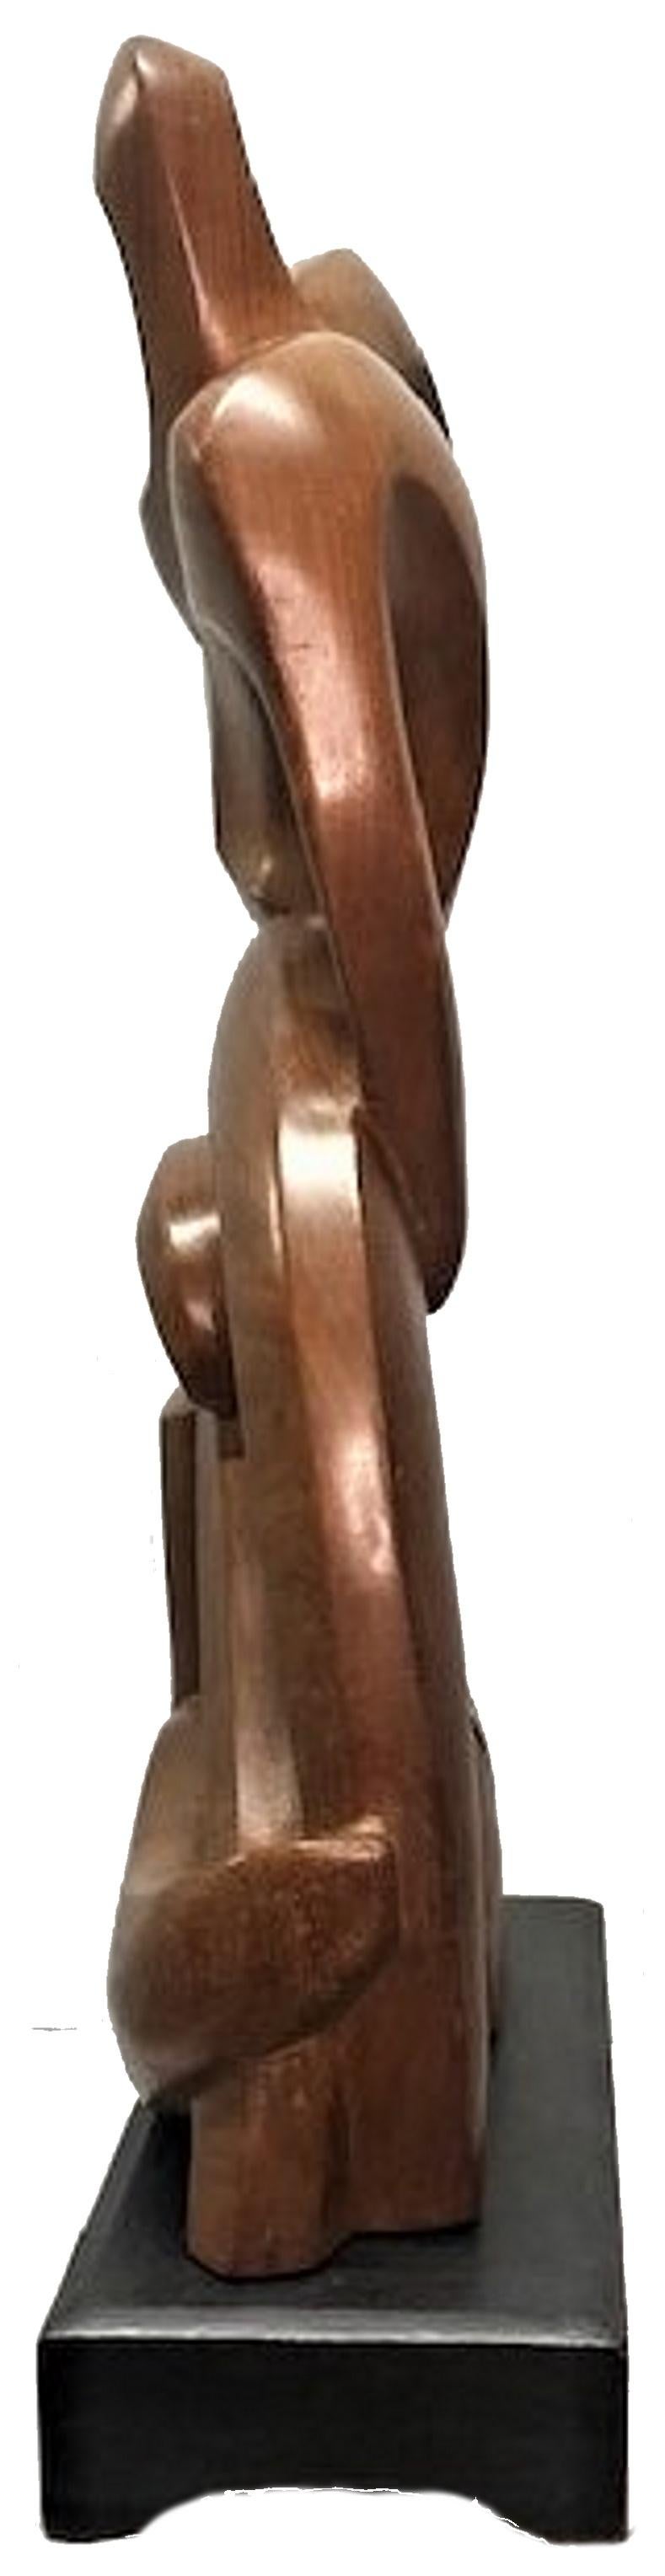 Enid Bell Palanchian, Tackle, Modernist Carved Mahogany Sculpture, ca. 1953 In Good Condition For Sale In New York, NY